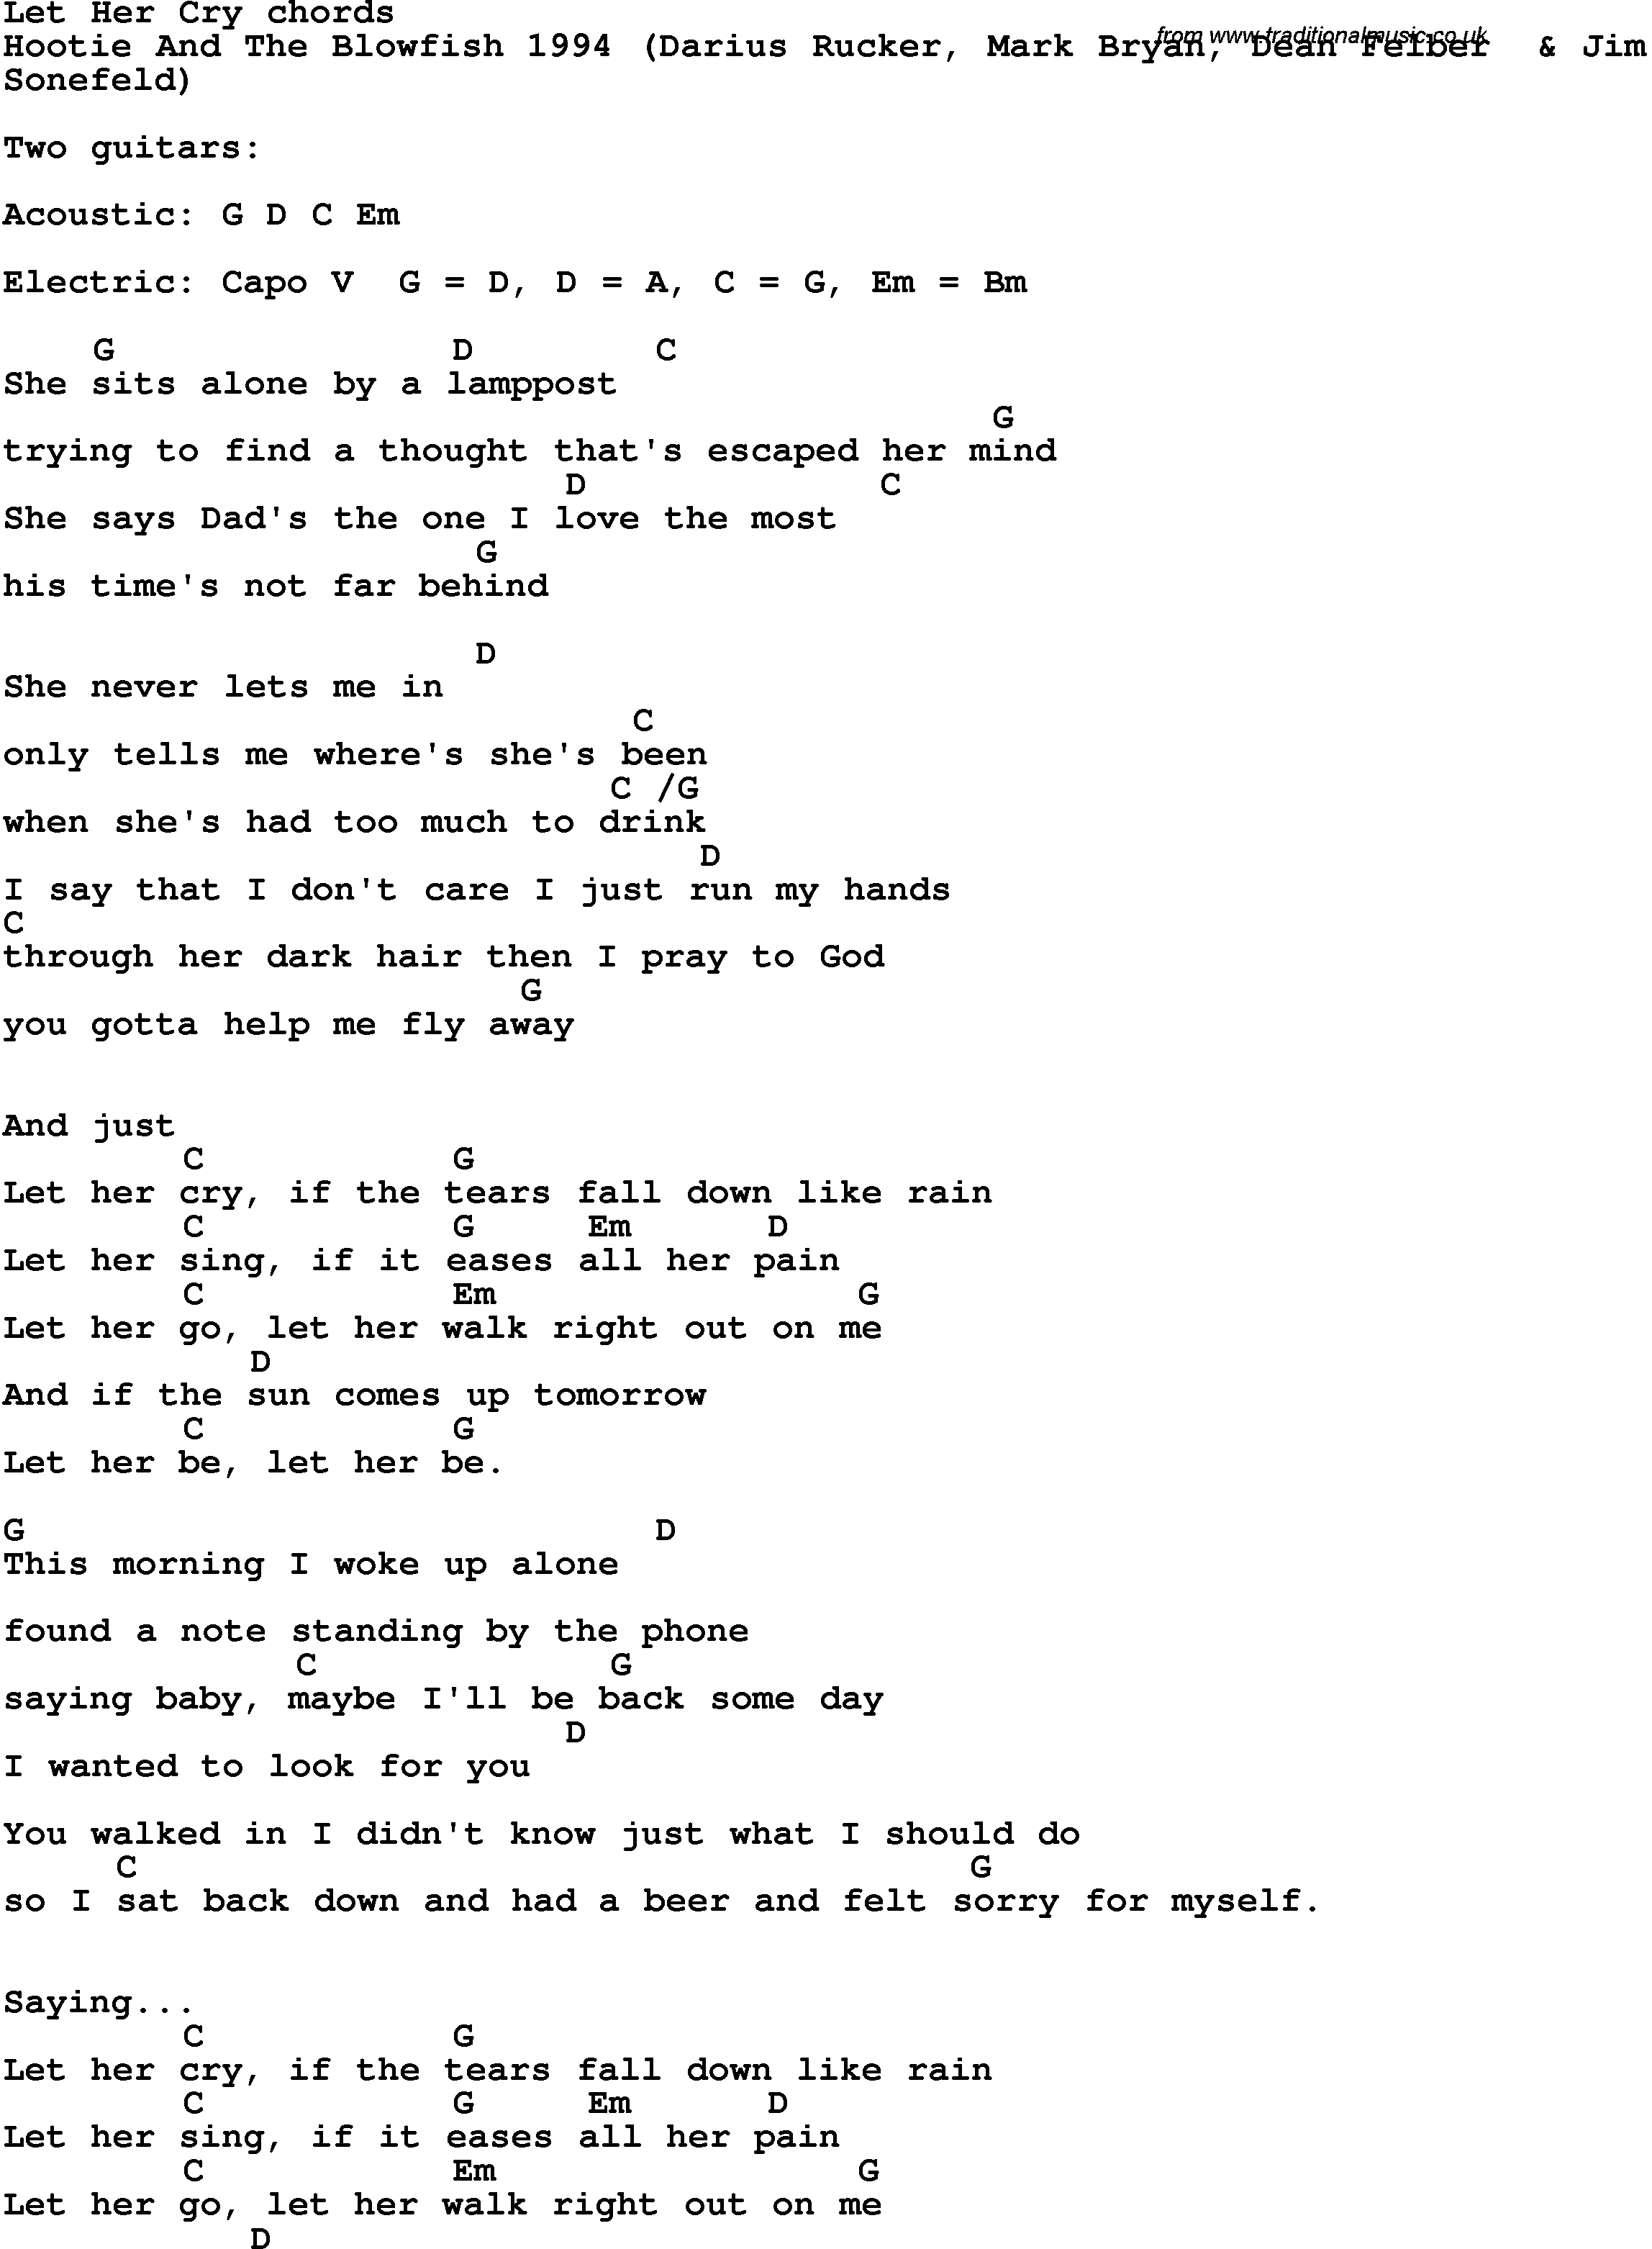 Song Lyrics with guitar chords for Let Her Cry